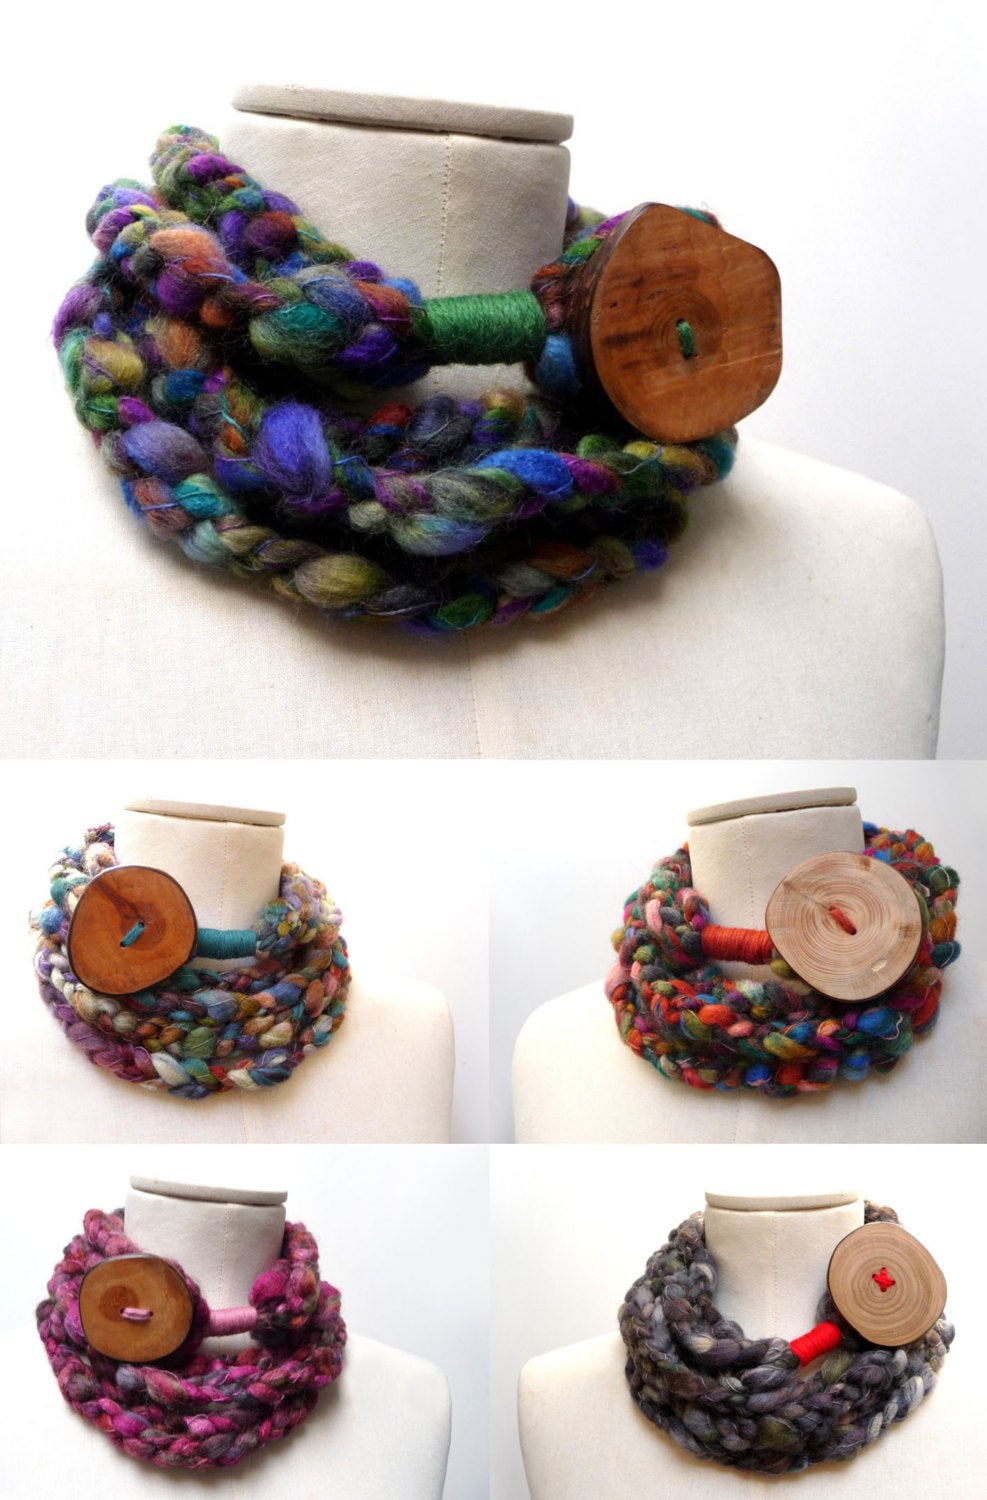 Loop Infinity Scarf Necklace, Crochet Scarflette Neckwarmer - Multicolor Yarn With Giant Wood Button - Custom Color